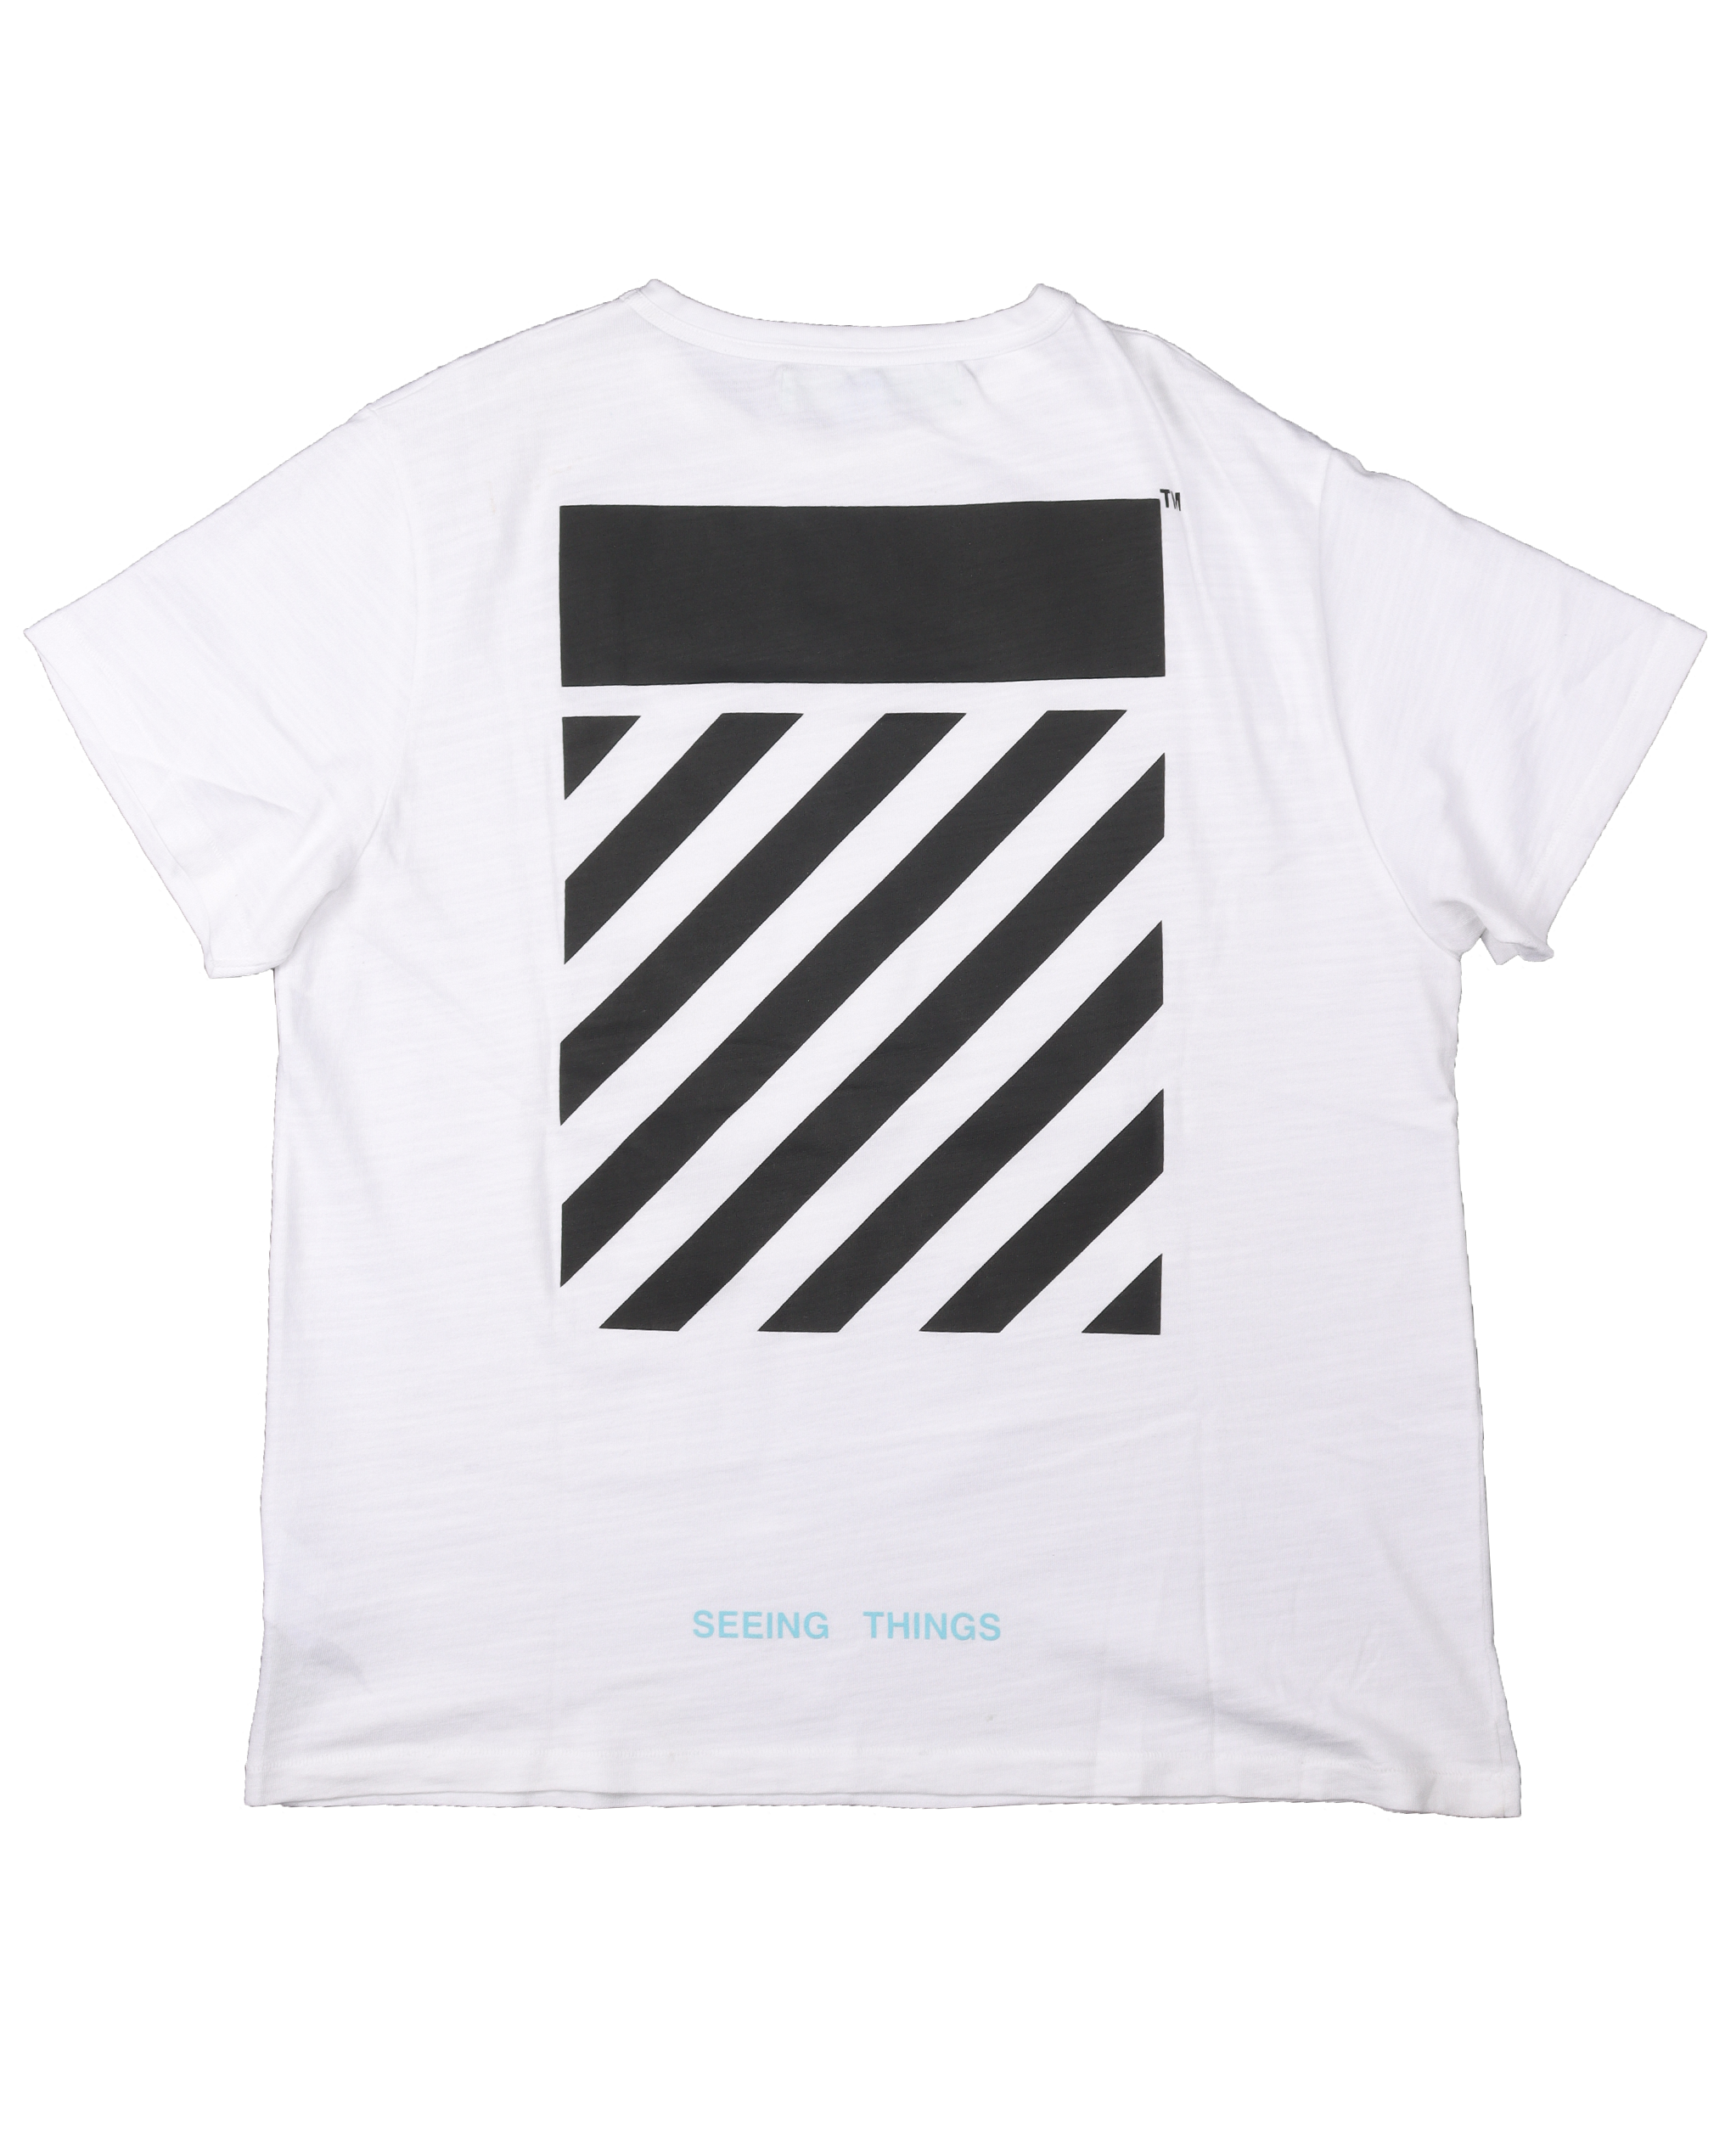 'SEEING THINGS' Graphic T-Shirt